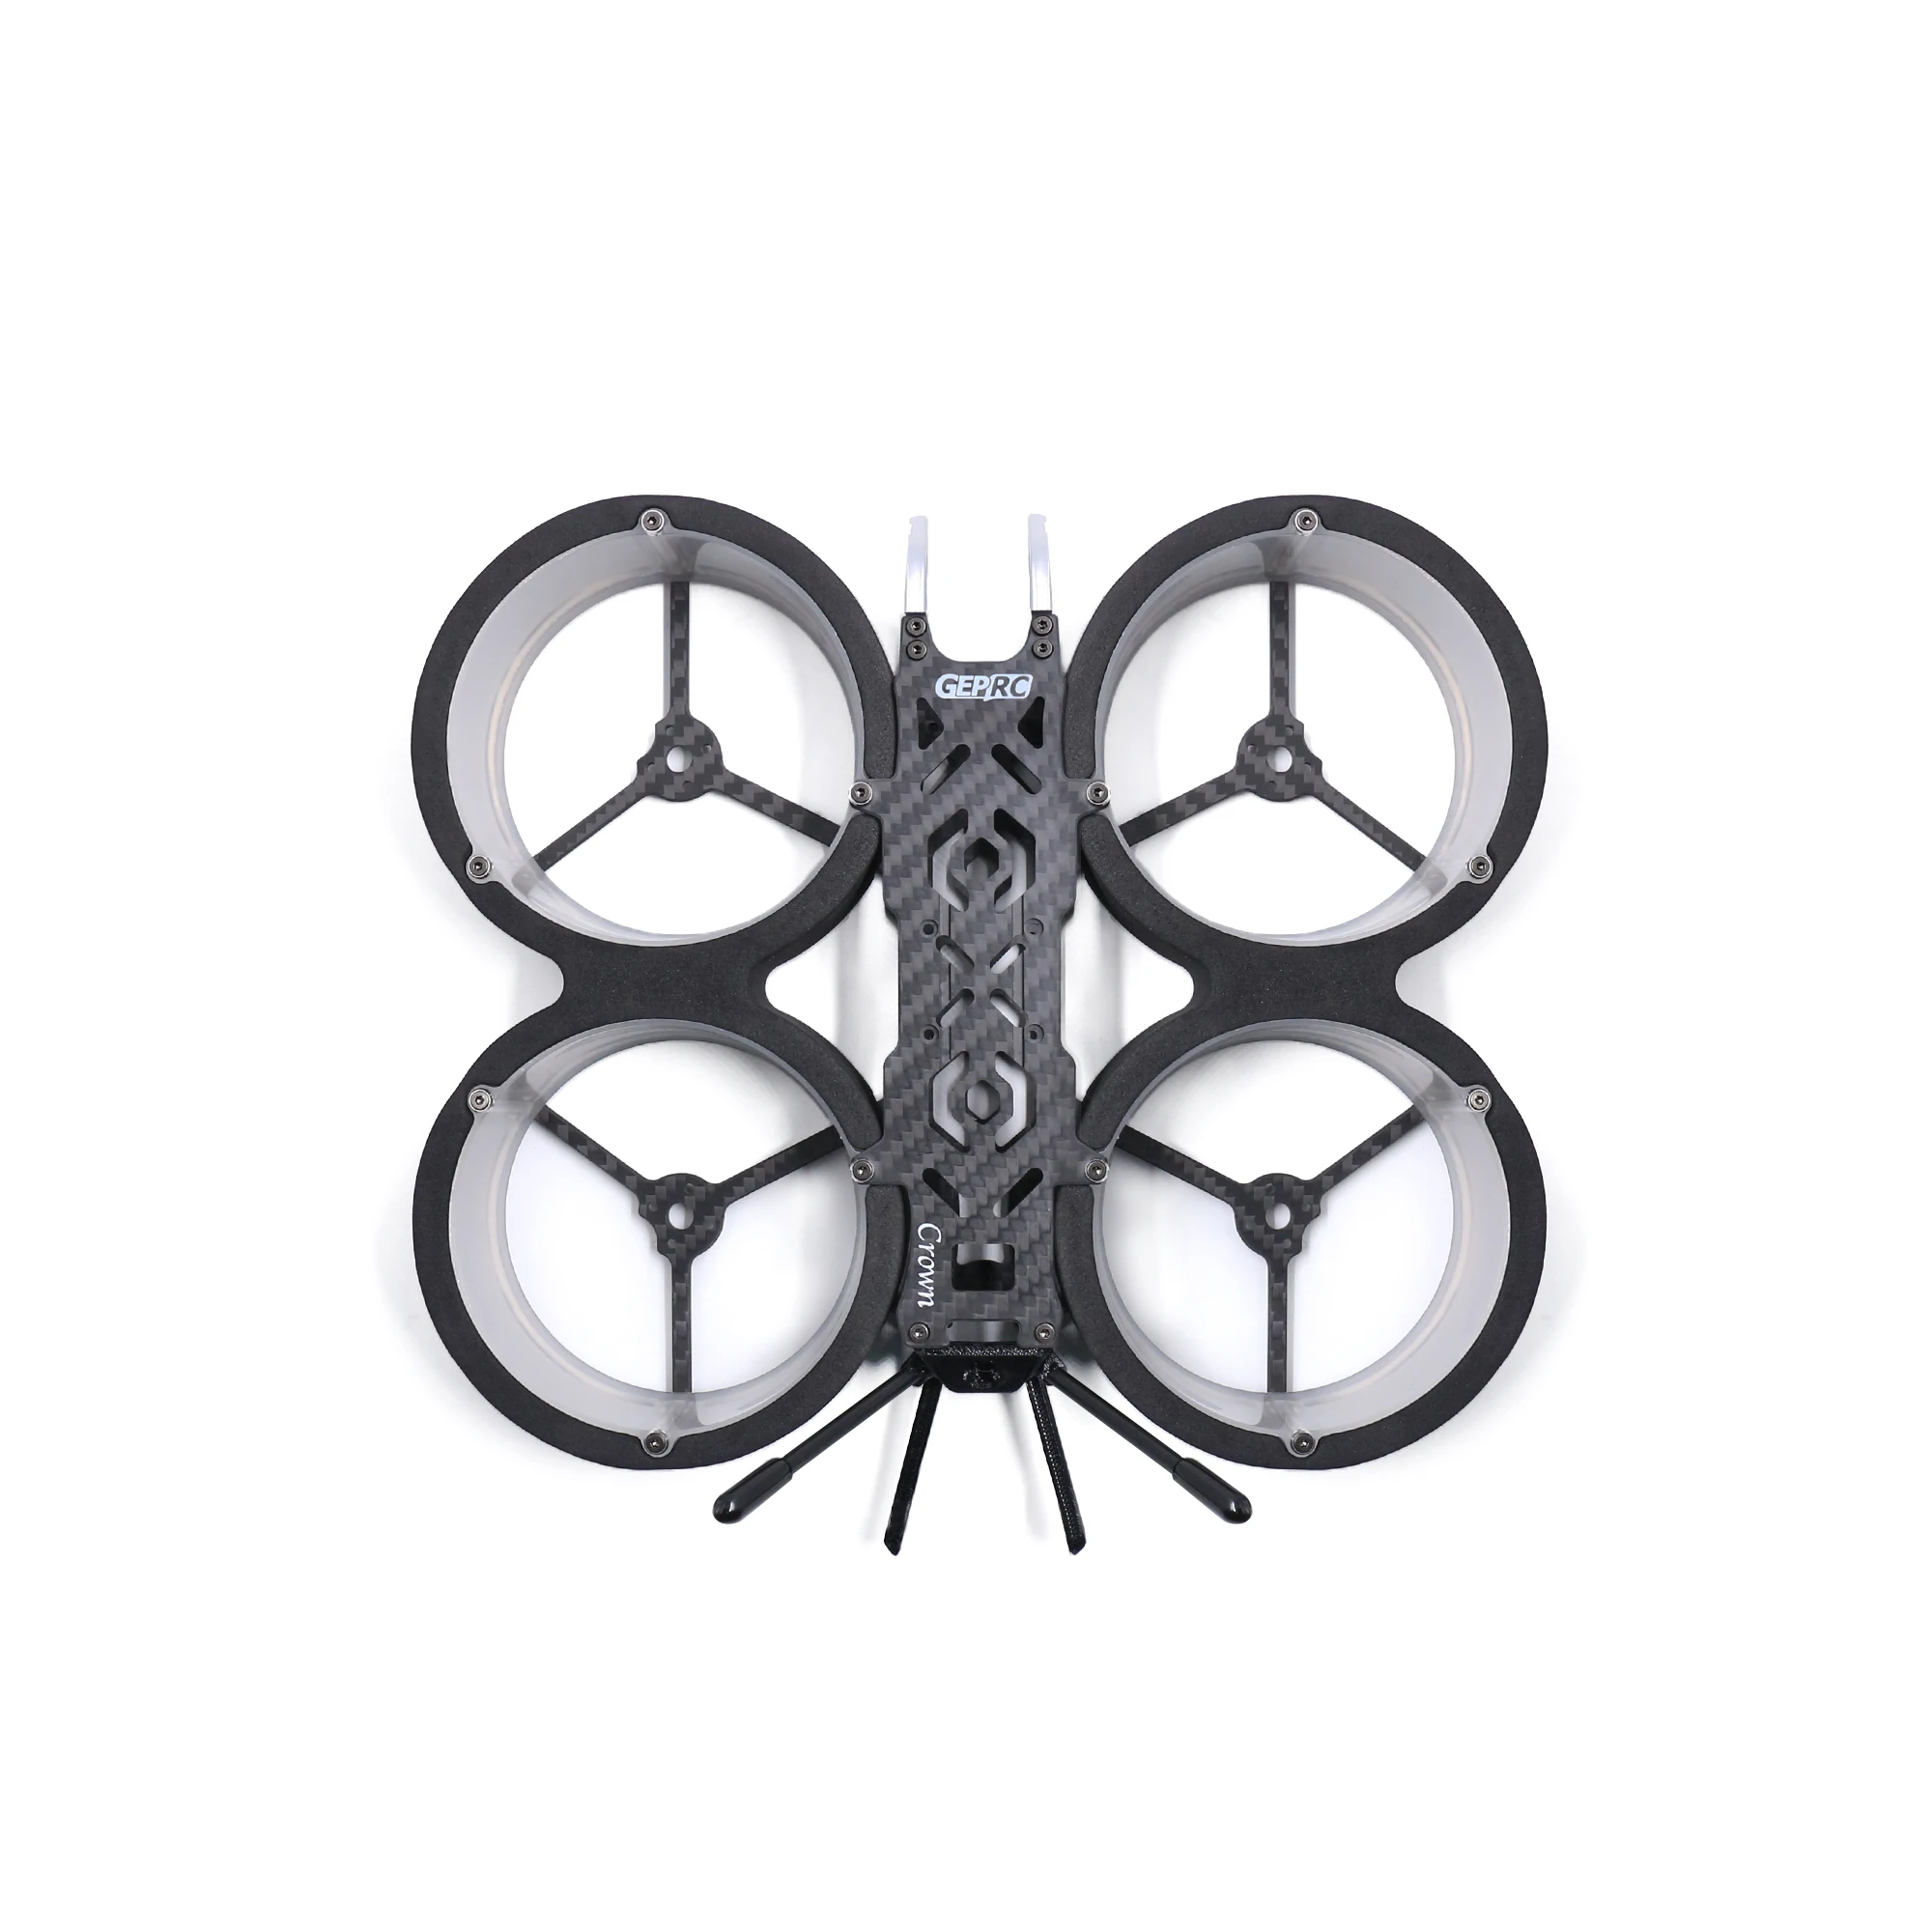 

GEPRC GEP-CW3 Frame 3 Inch Crown Series Drone Carbon Fiber Frame Suitable For RC FPV Quadcopter Cinewhoop Accessories Parts